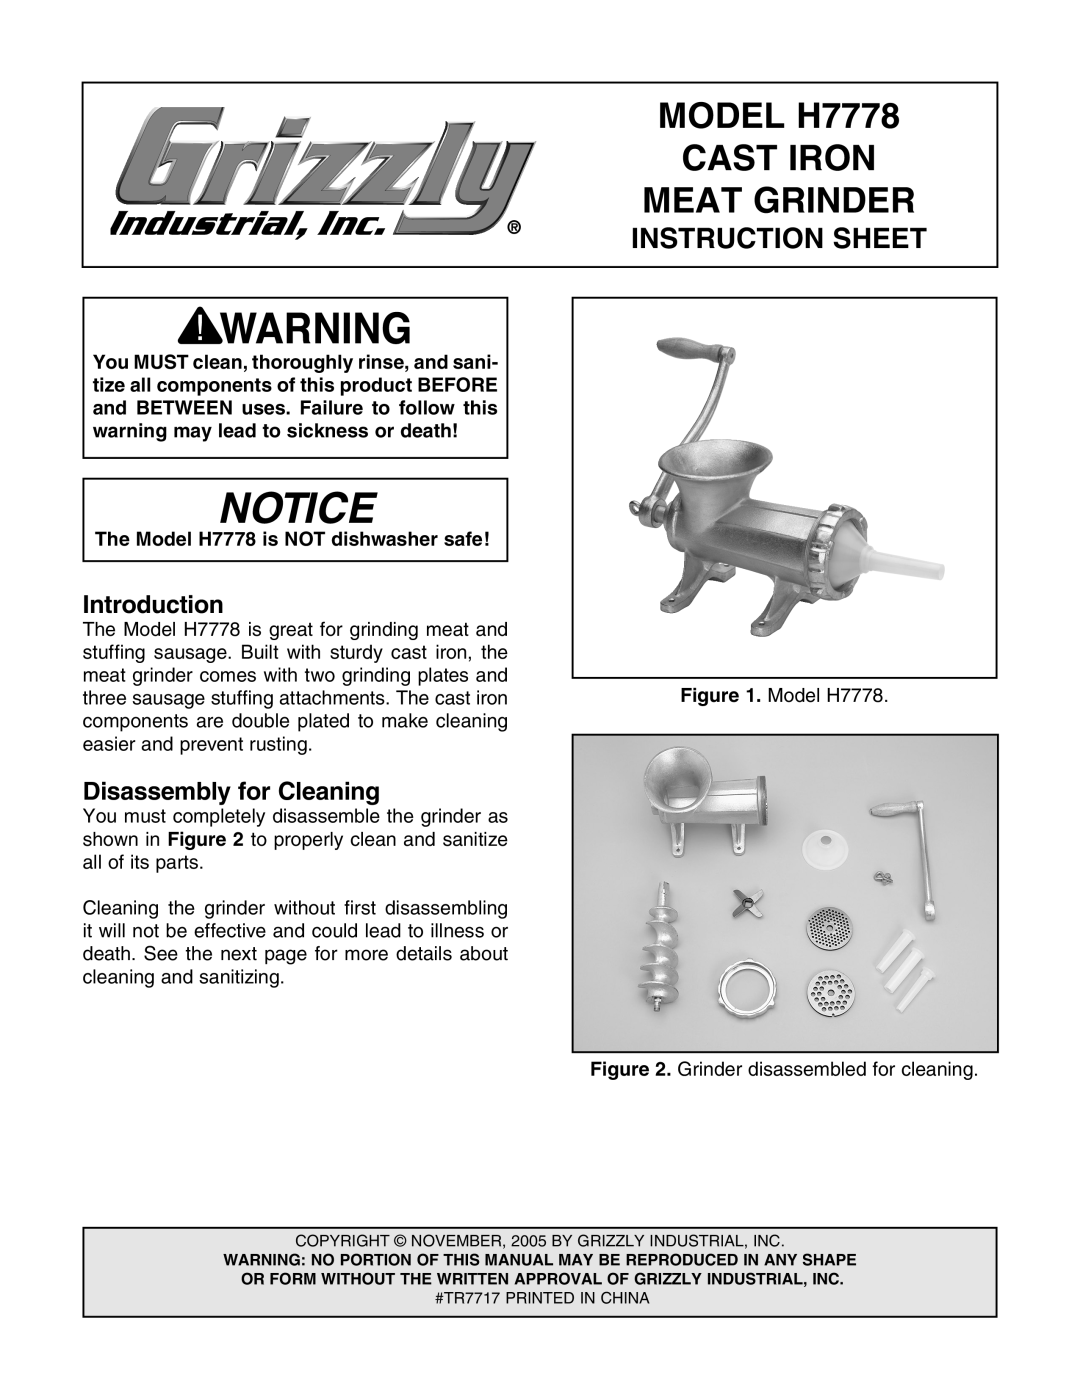 Grizzly instruction sheet Introduction, Disassembly for Cleaning, MODEL H7778, Cast Iron, Meat Grinder 